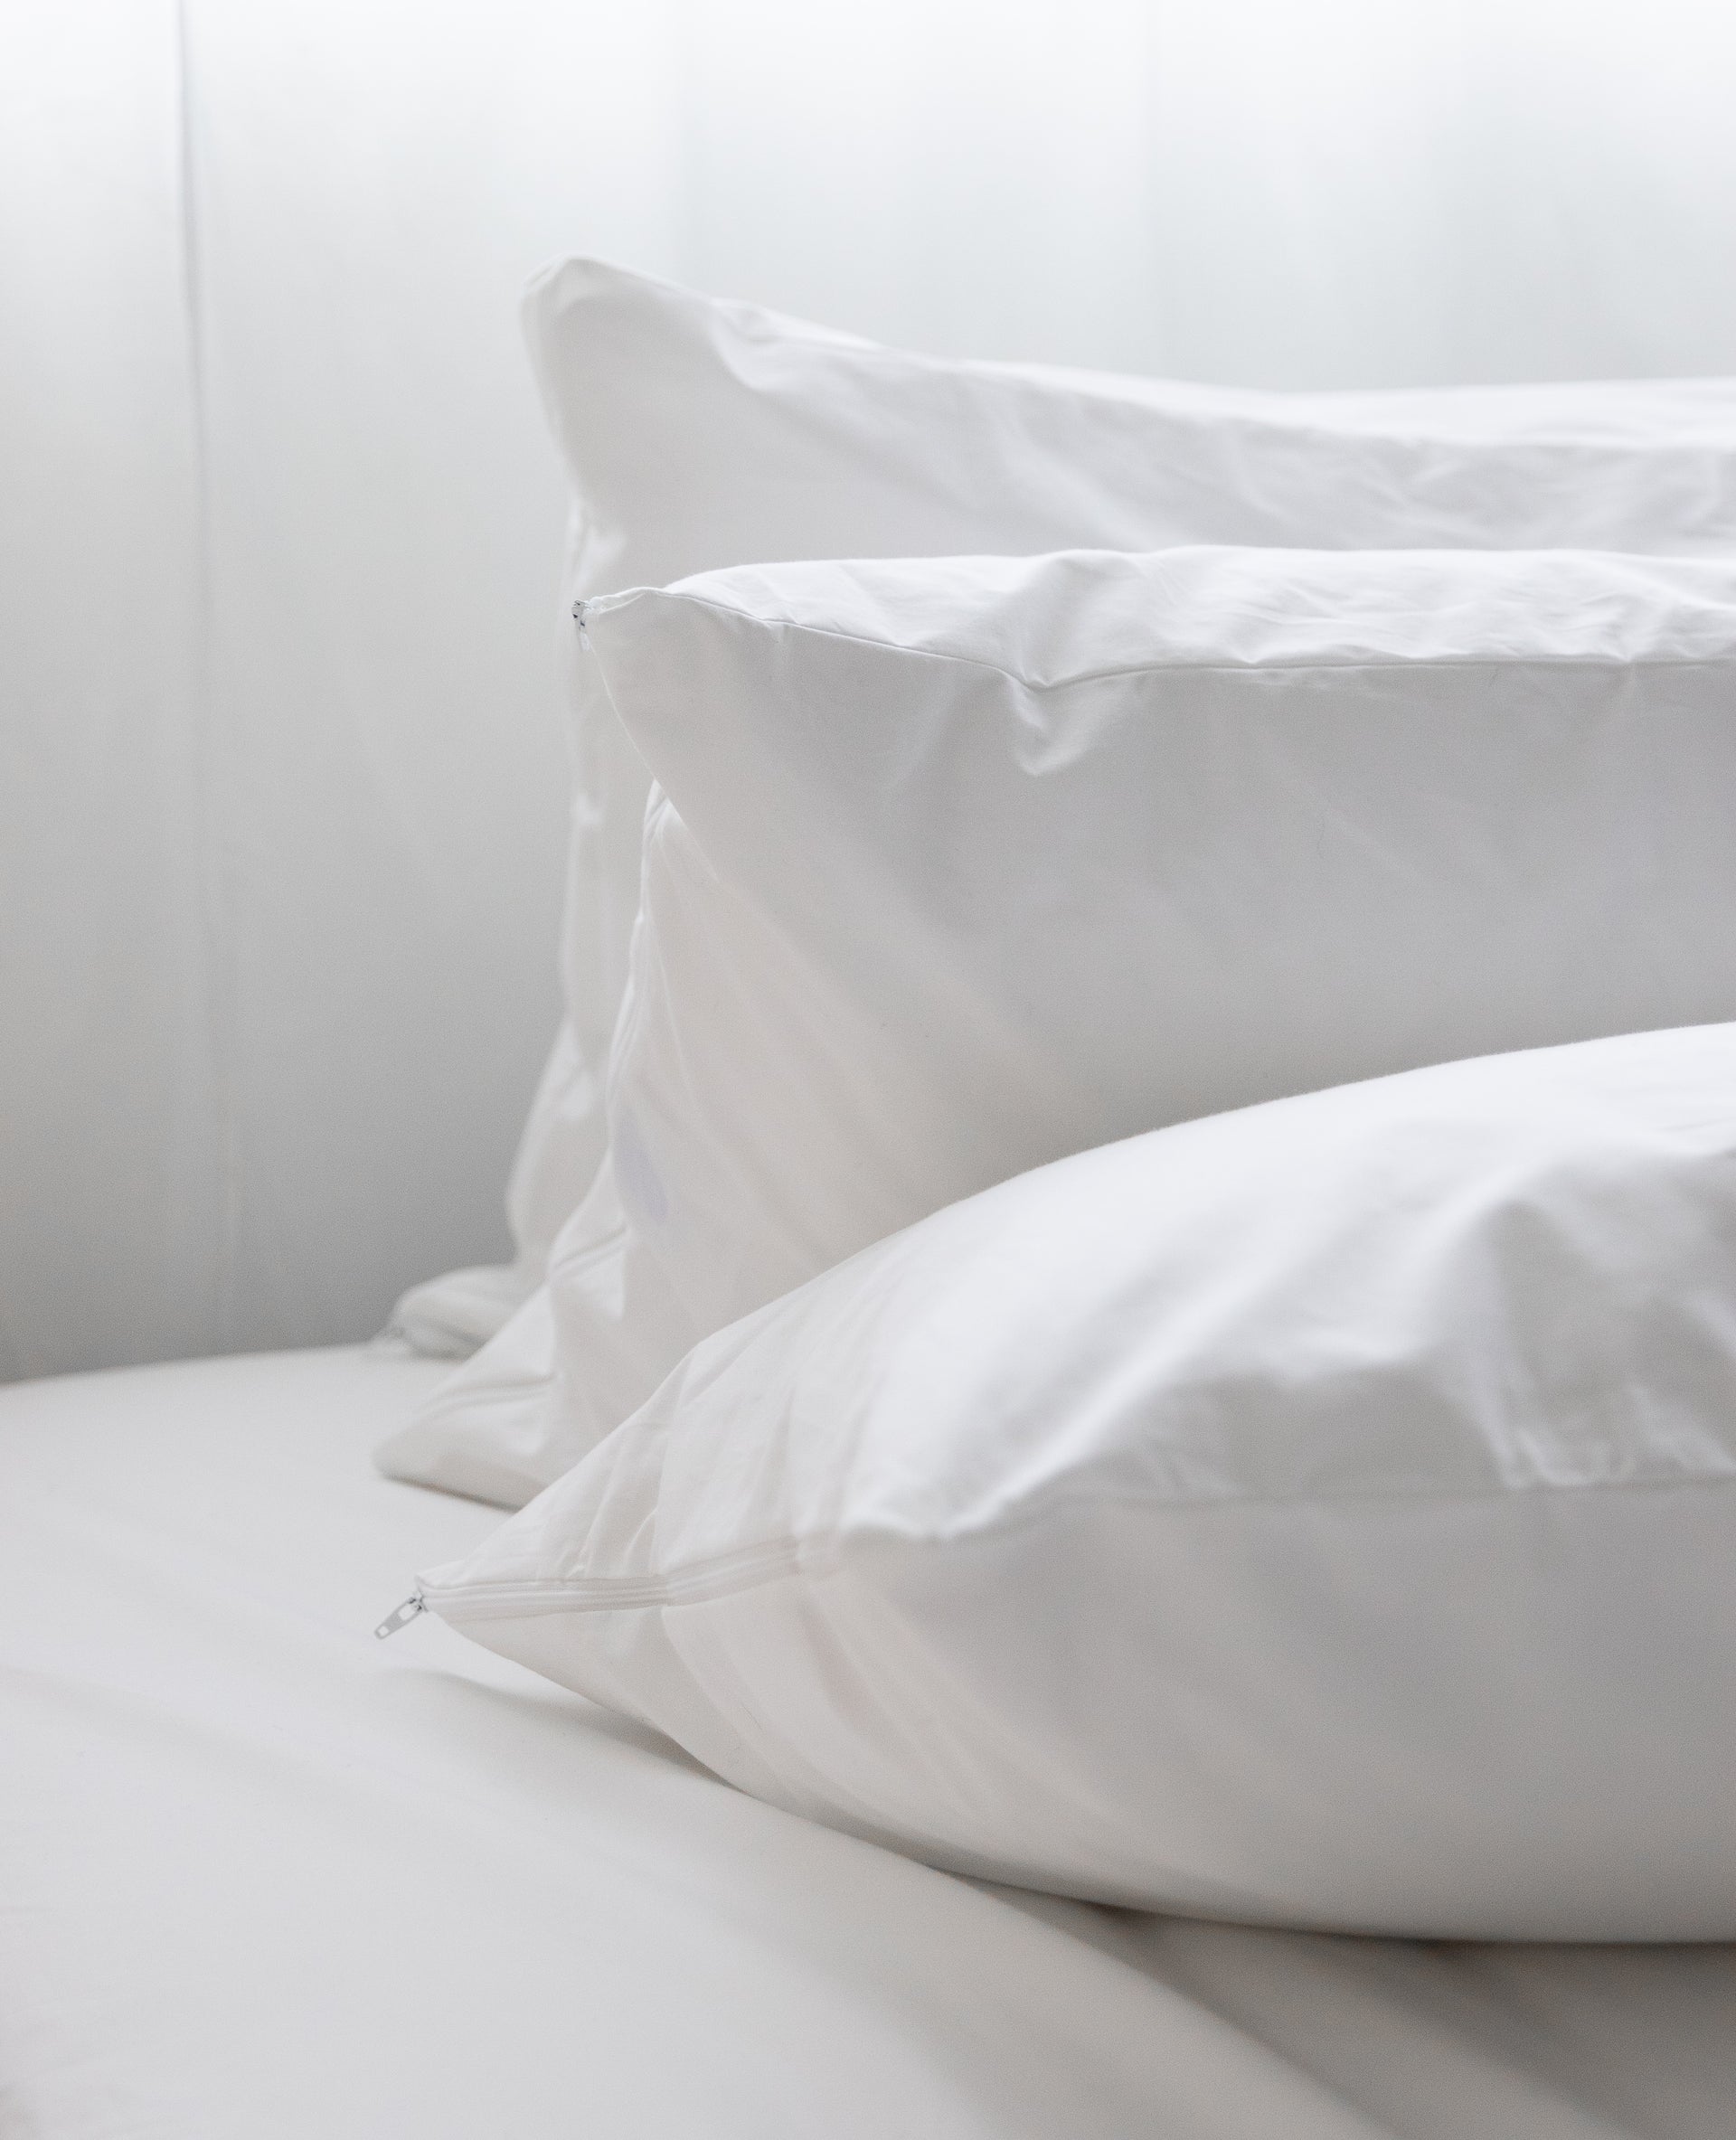 How Important is the Right Pillow for Getting a Good Night's Sleep?